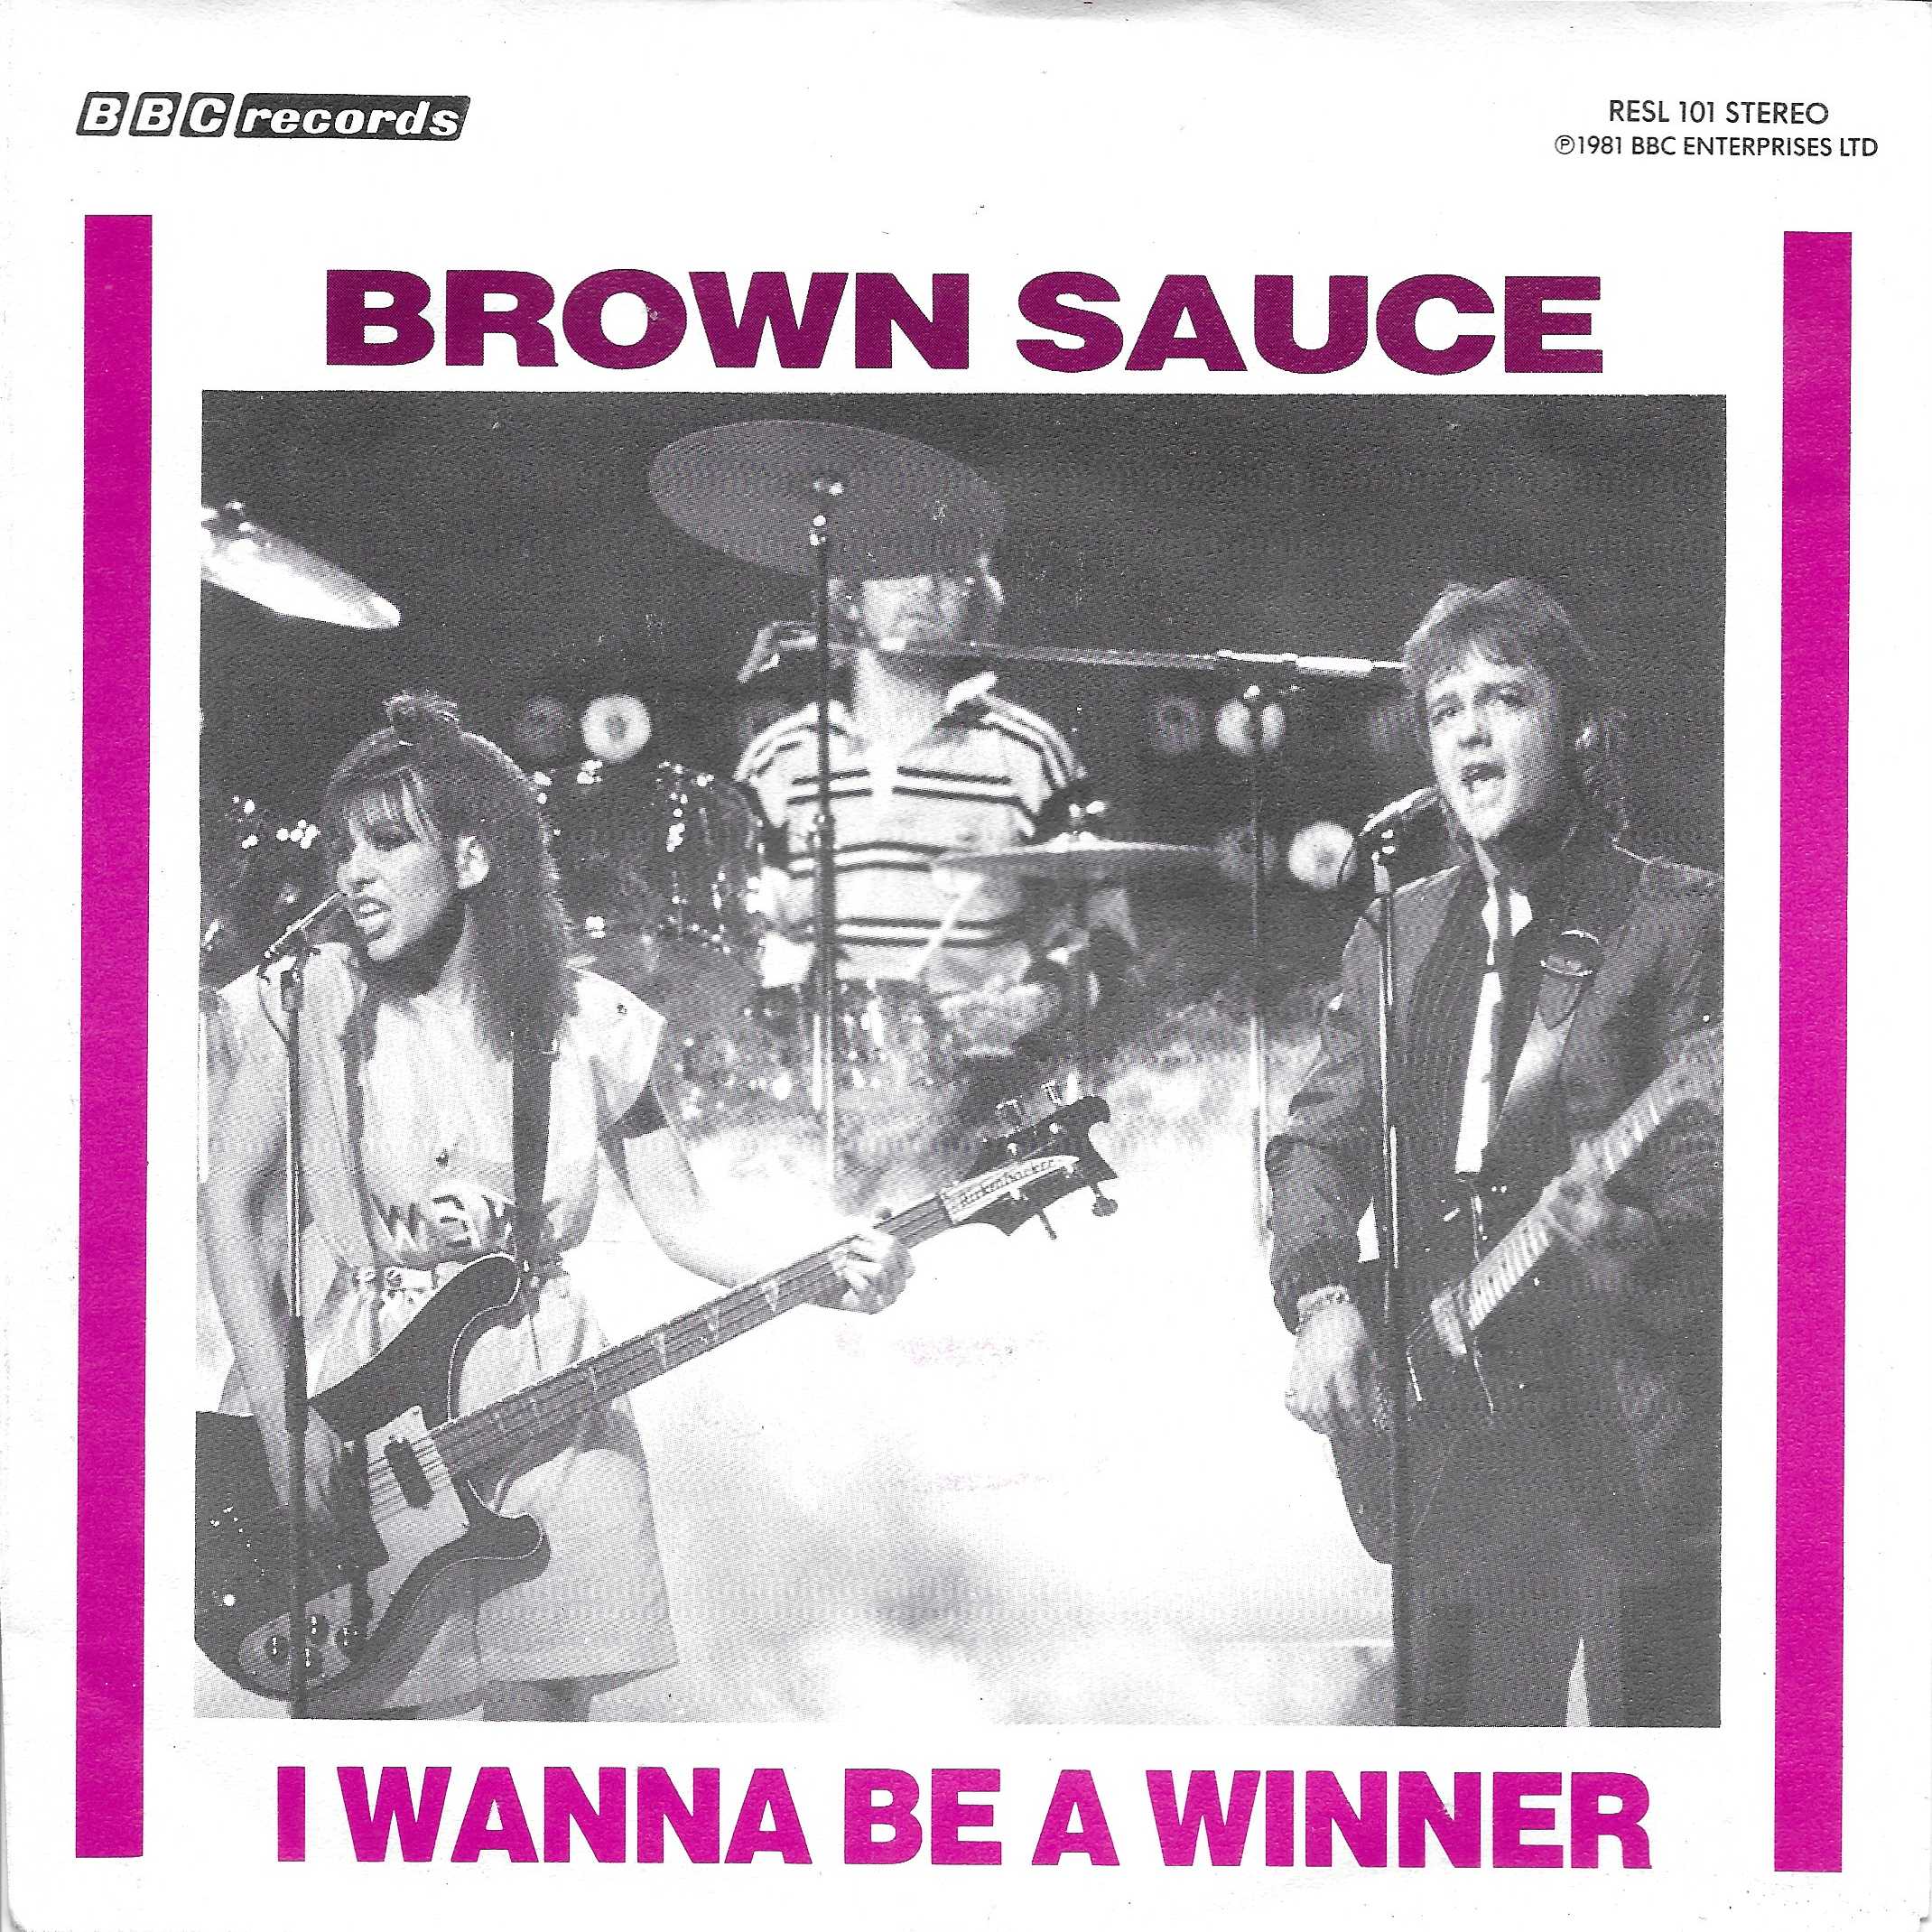 Picture of I wanna be a winner (Swap shop) by artist B. A. Robertson from the BBC singles - Records and Tapes library